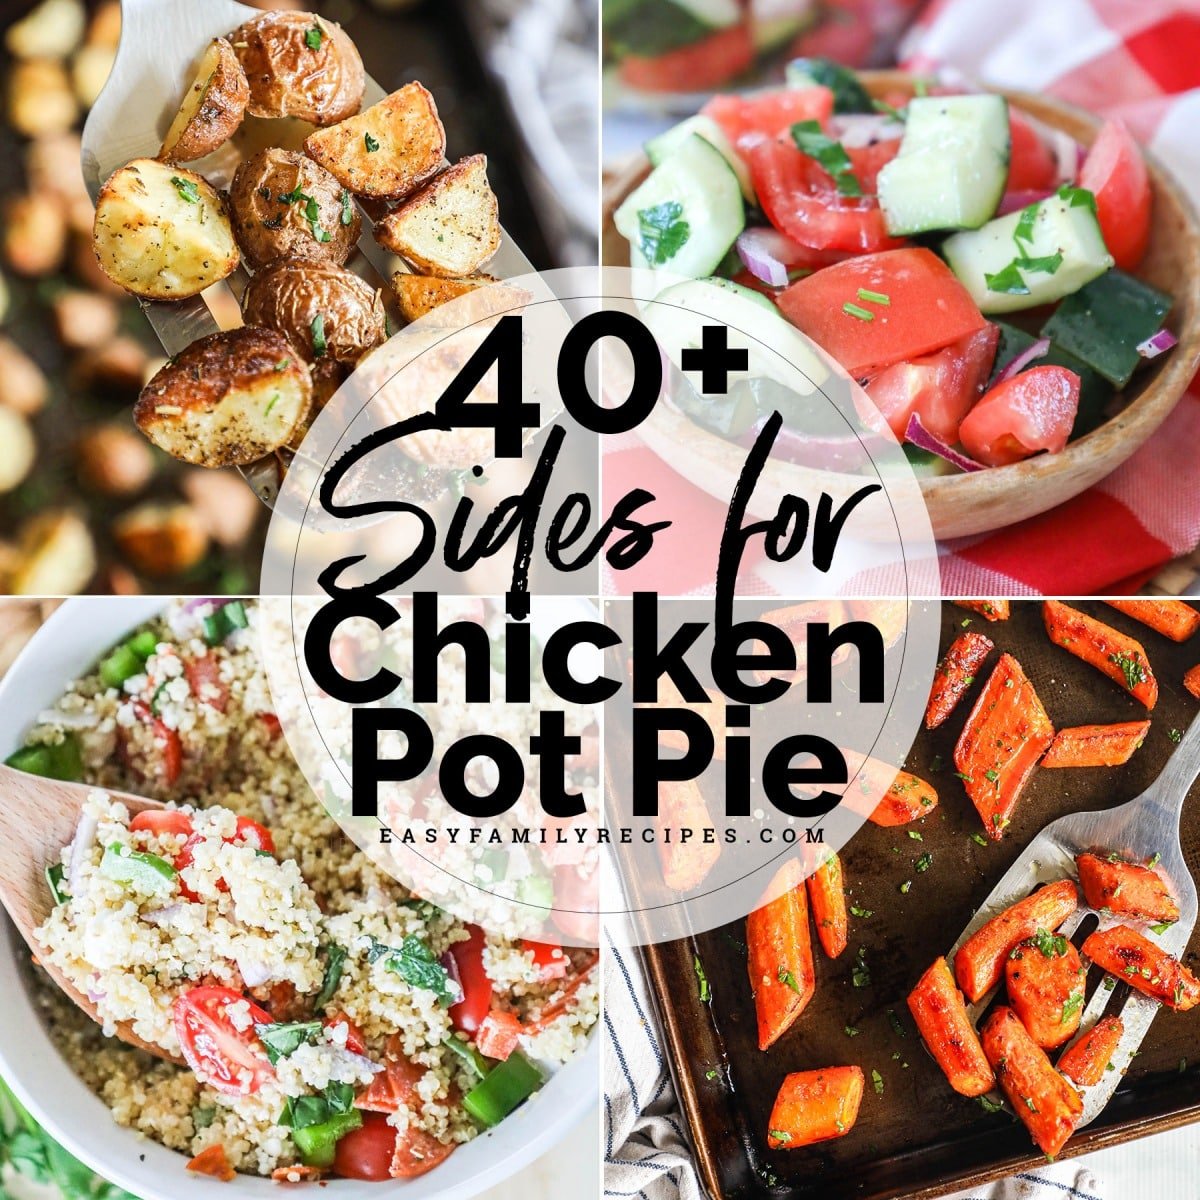 What to Serve with Chicken Pot Pie – 40+ Side Dishes!